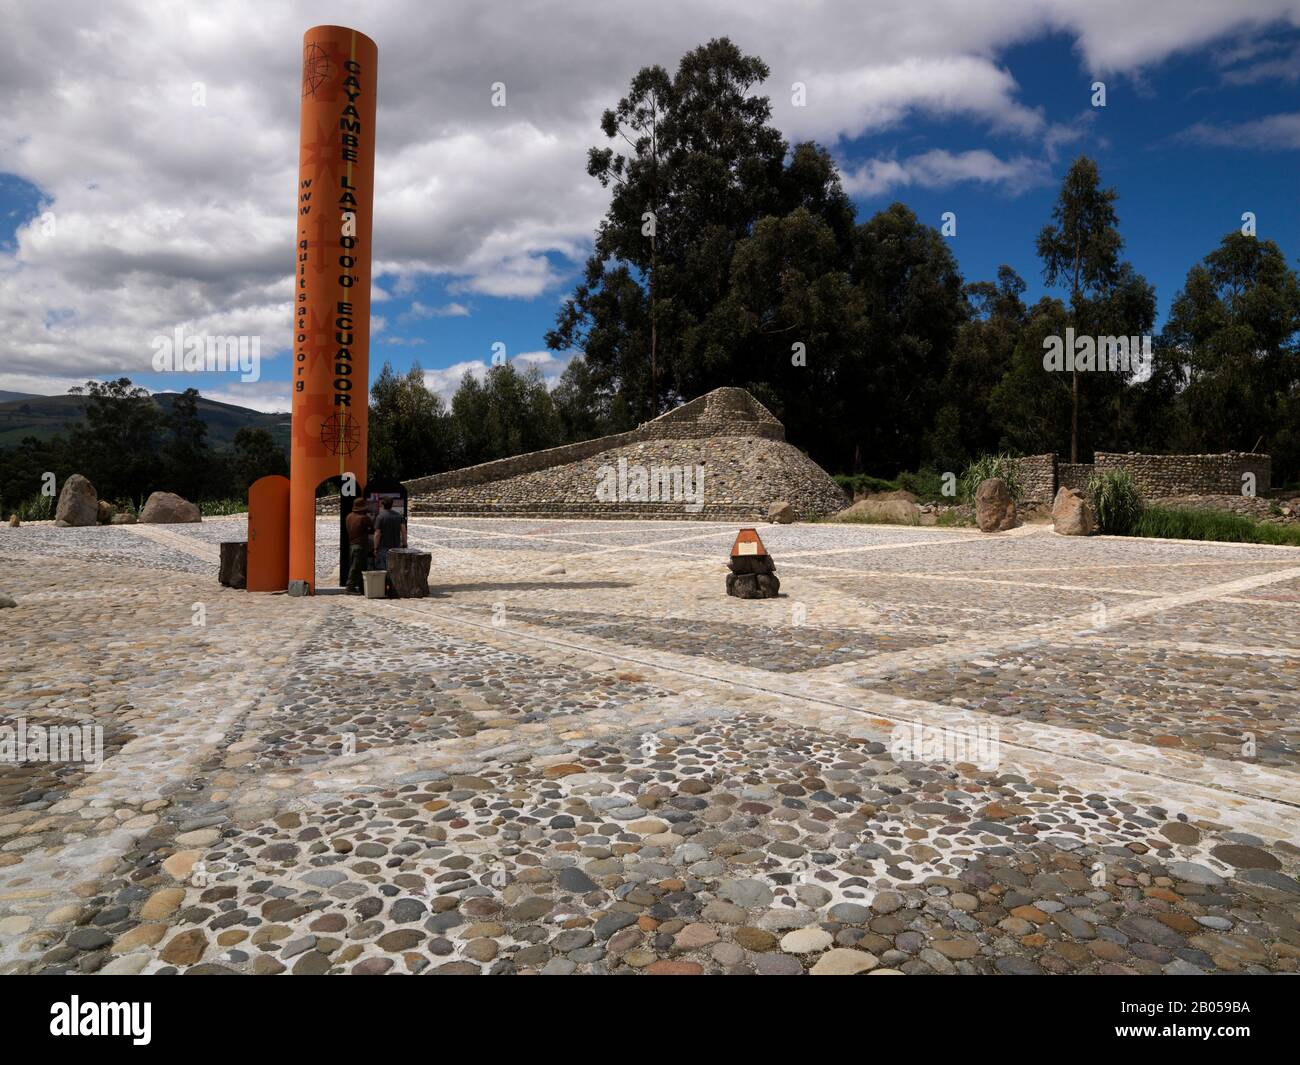 The more accurate equatorial monument, this monument located using GPS technology, Cayambe, Ecuador Stock Photo